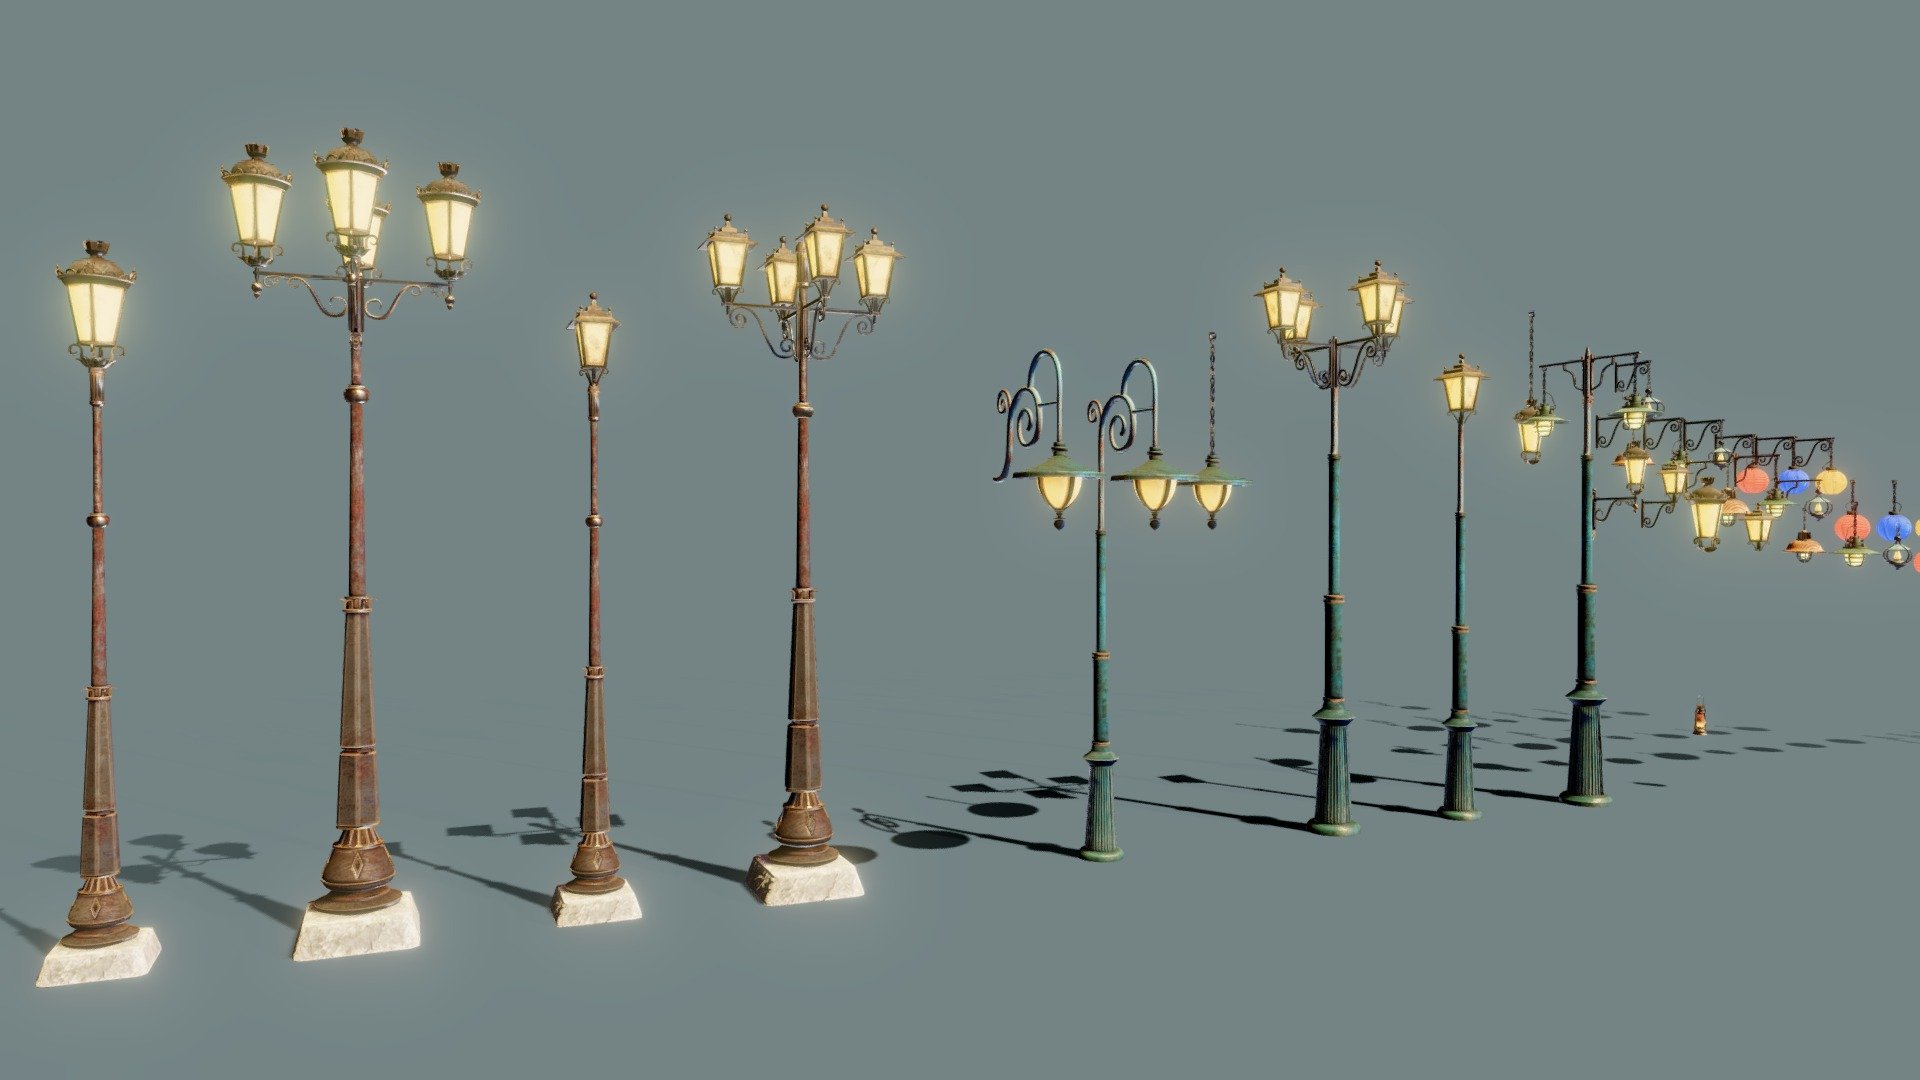 Urban lighting collection consisting of lamps, lanterns, sconces and light fixtures.
Made in Blender and painted in Substance Painter.




Game Ready

42 Objets, Prefabs and kitbash parts.

2 x Atlas Texture. 8K and 4K

Unwraped with UVPackmaster 3.

UV channel for Lightmap

Easy exporting to other engines

PBR textures with emission map

JPG and PNG

Blend file included
 - Street Light Collection - Buy Royalty Free 3D model by Lucas Donderis (@lucas.donderis) 3d model